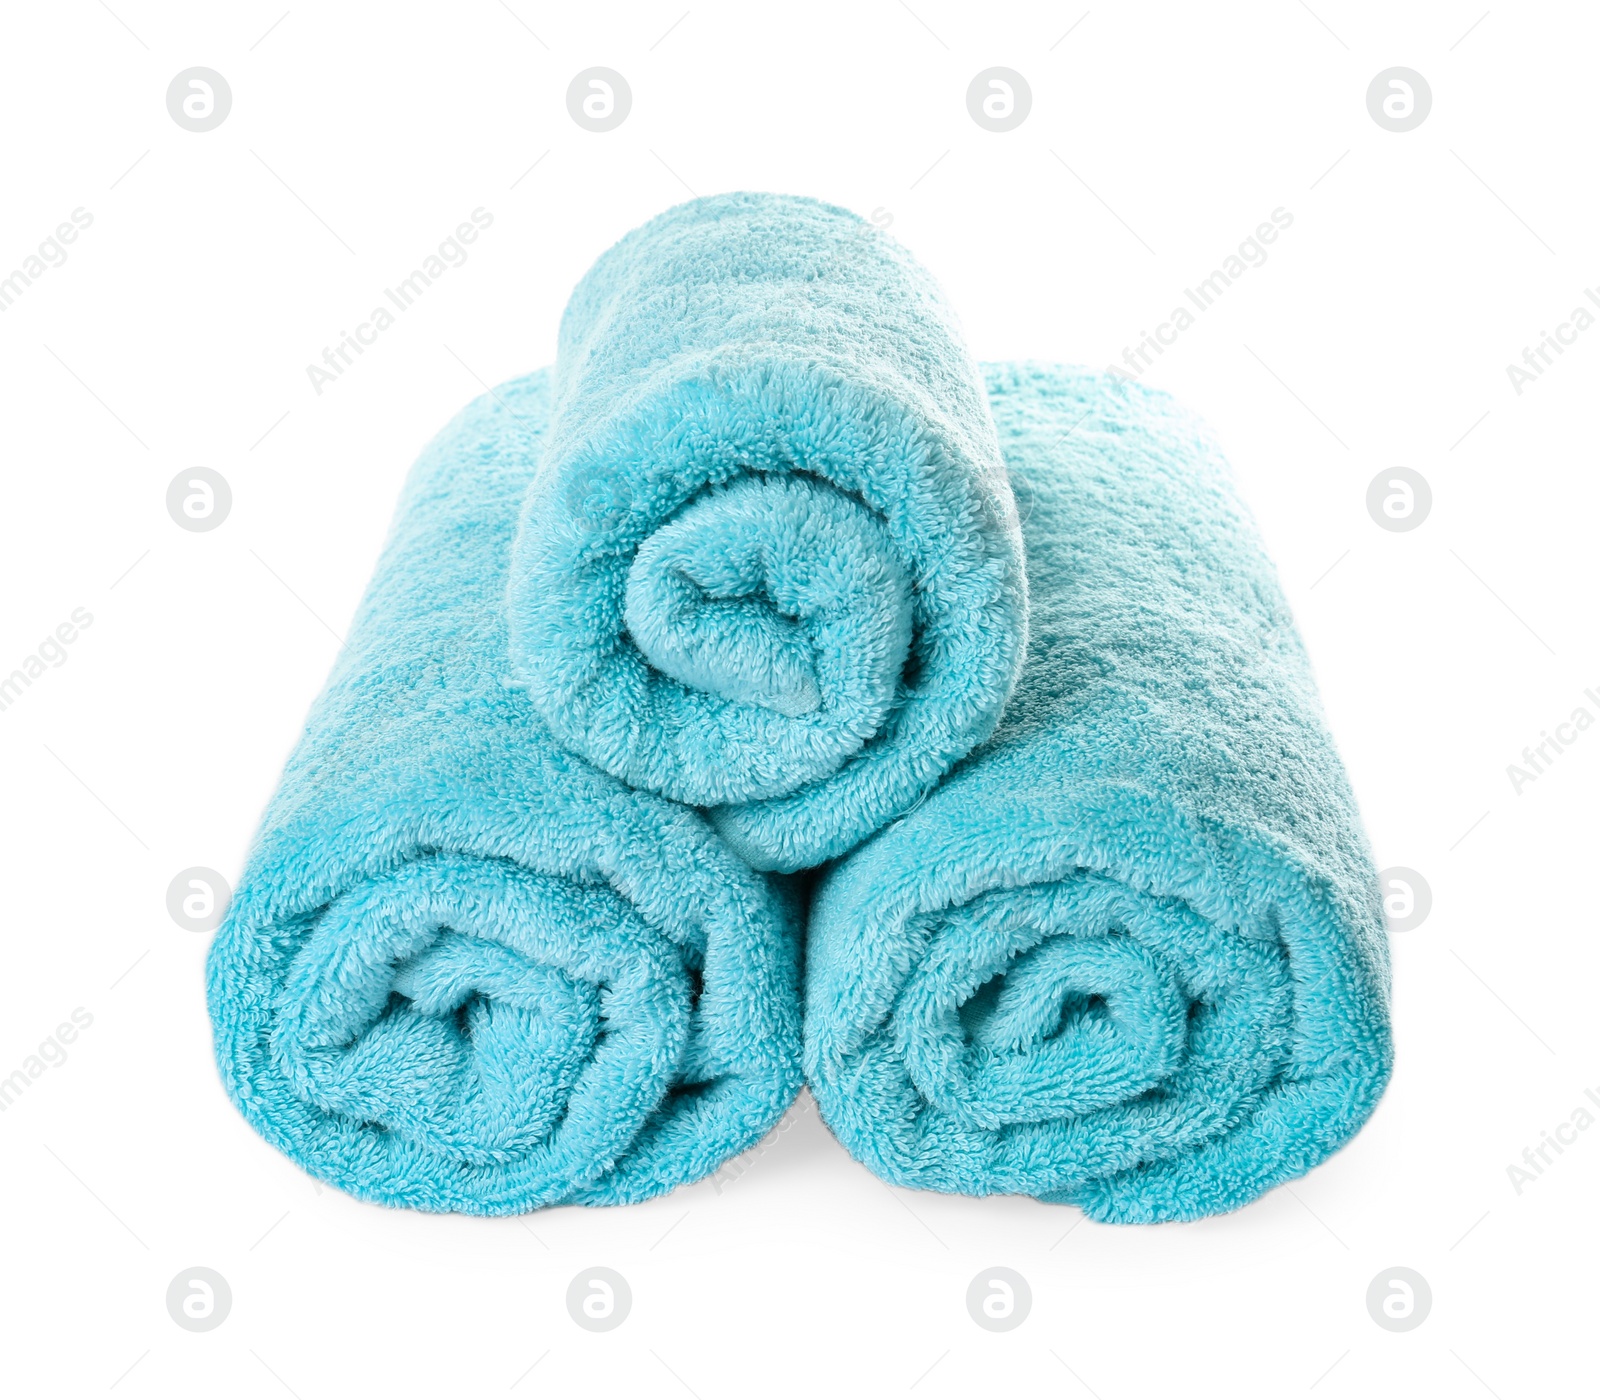 Photo of Rolled clean turquoise towels on white background